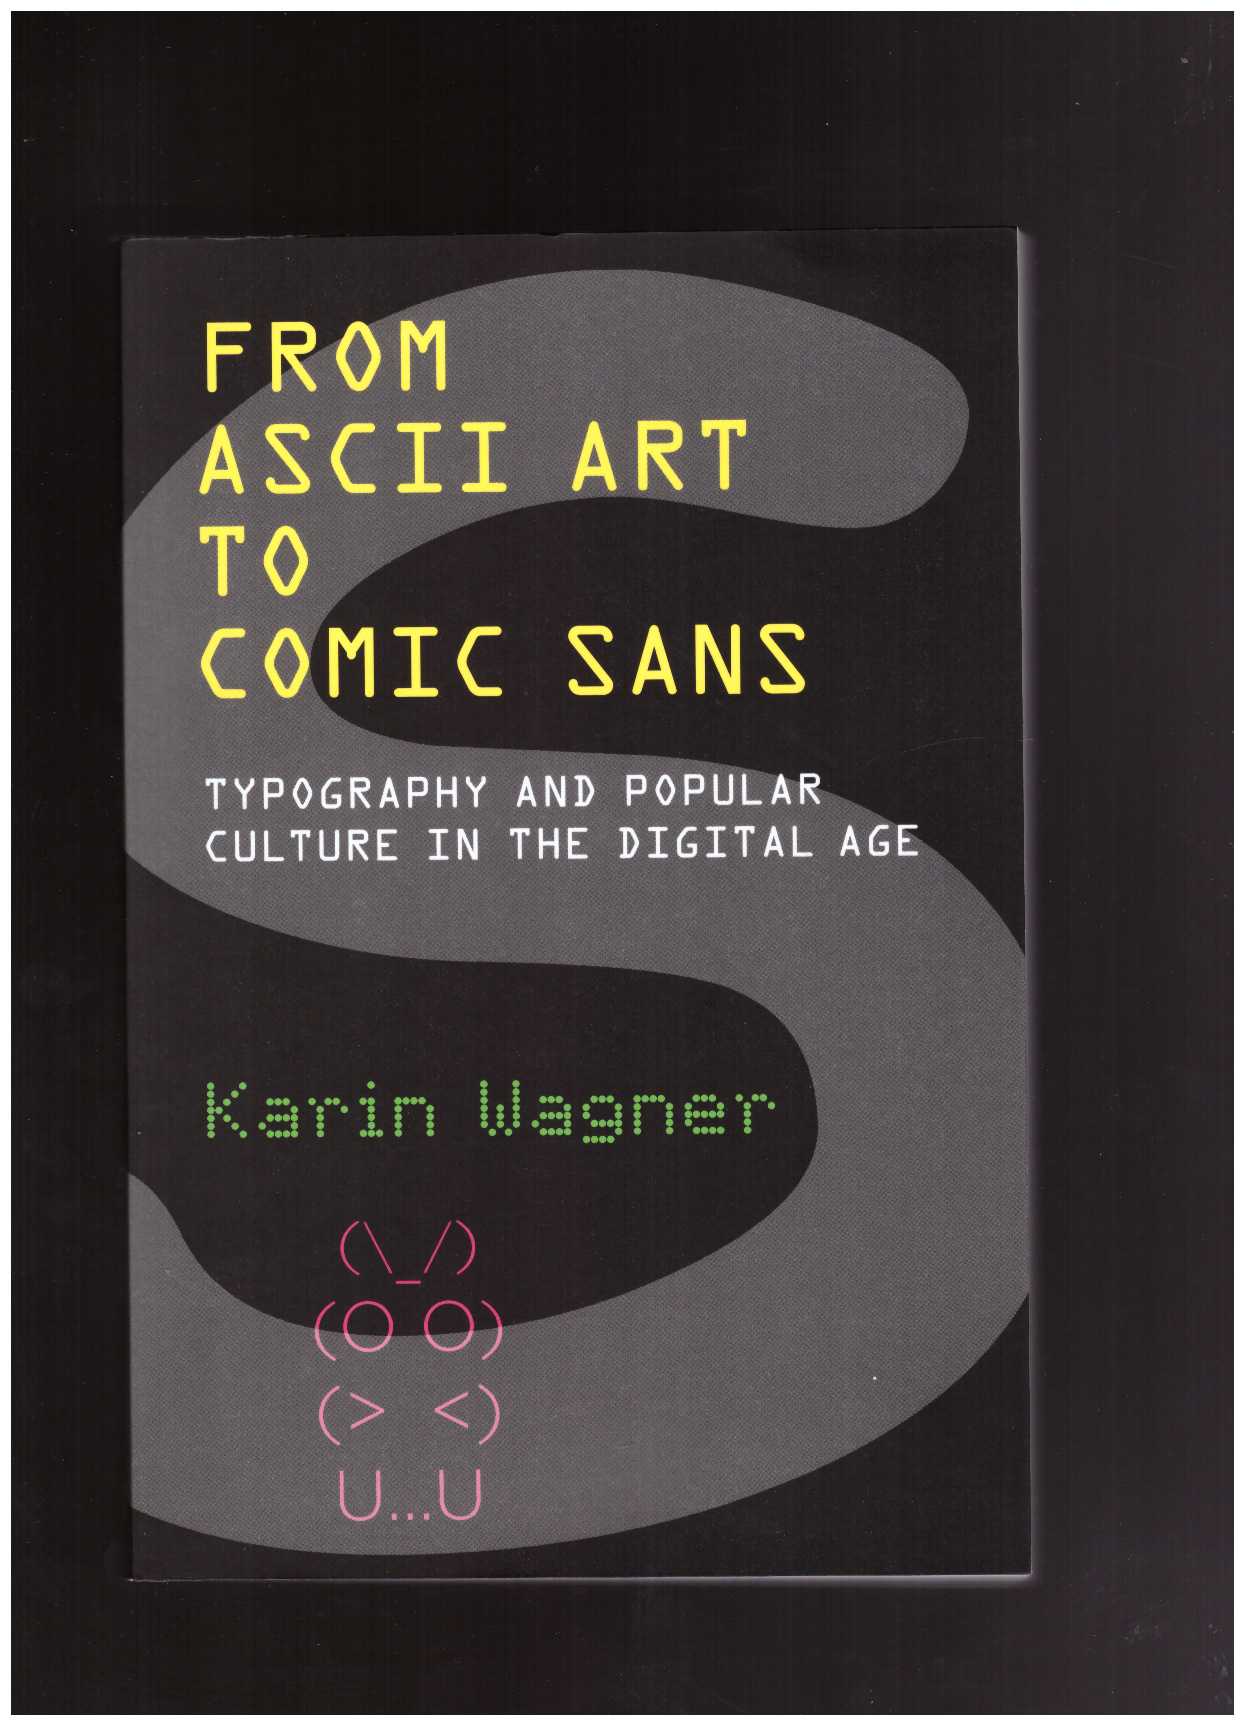 WAGNER, Karin - From ASCII Art to Comic Sans. Typography and Popular Culture in the Digital Age